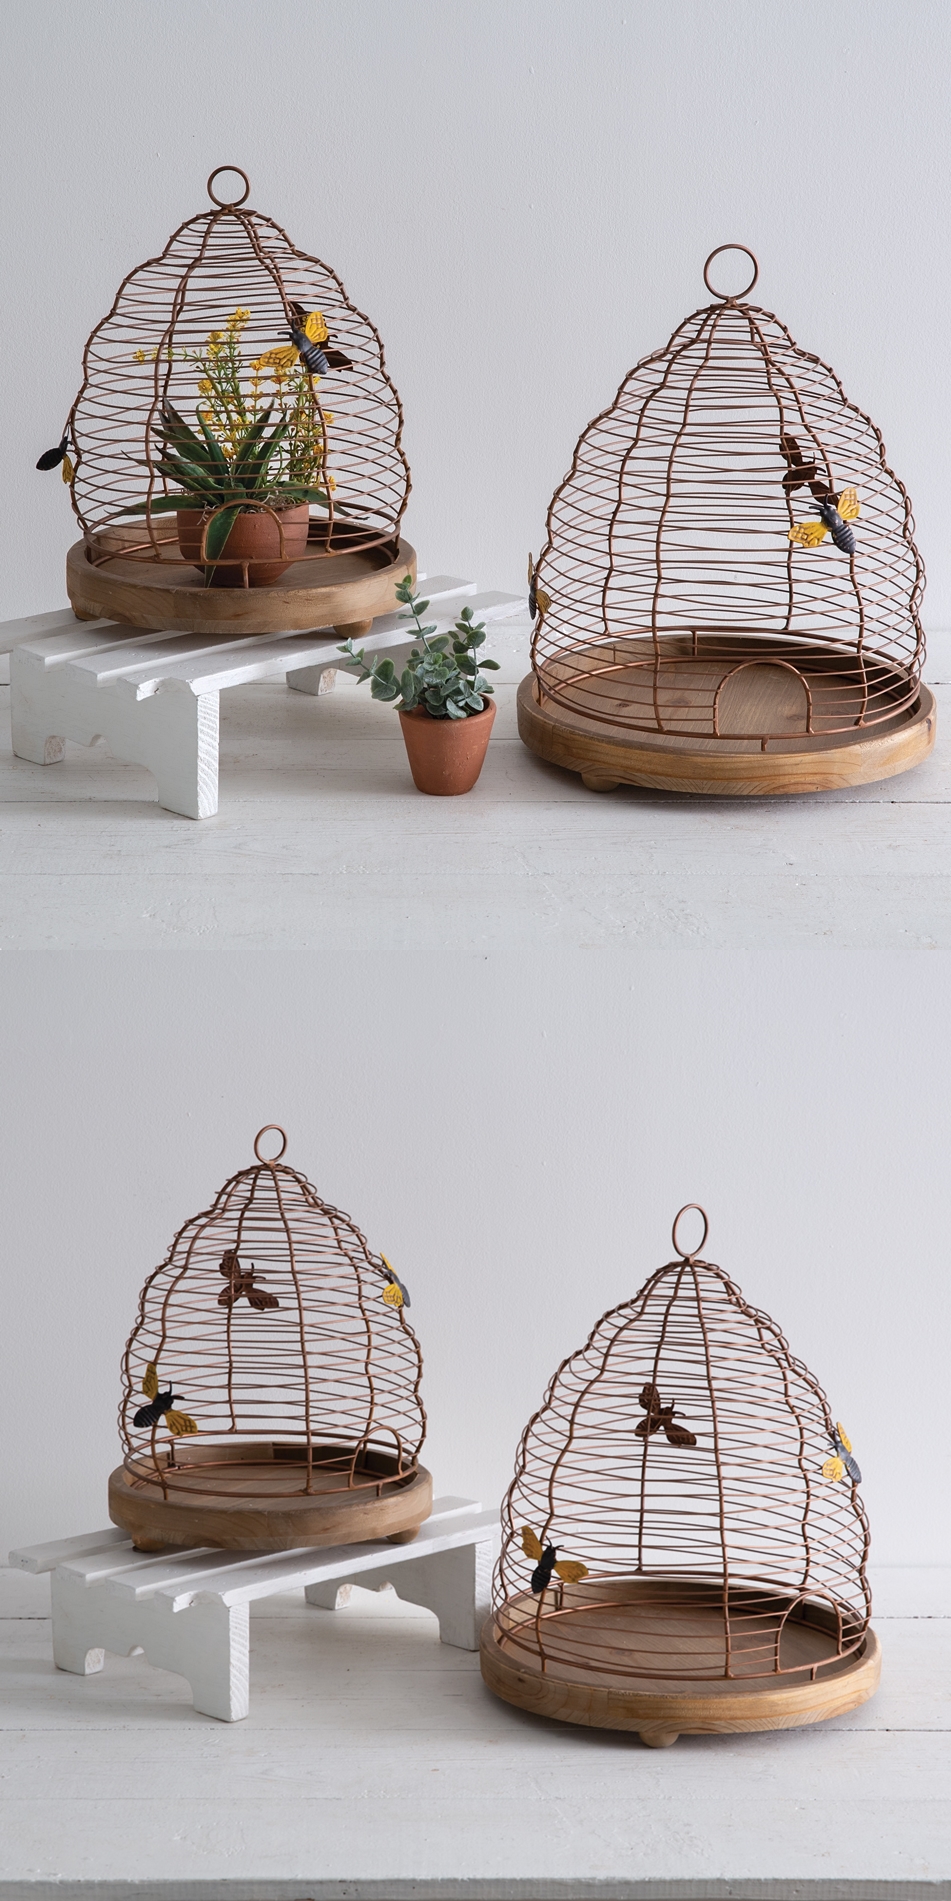 CTW Home Collection Set of Two Wire Beehive Cloches with Wood Bases